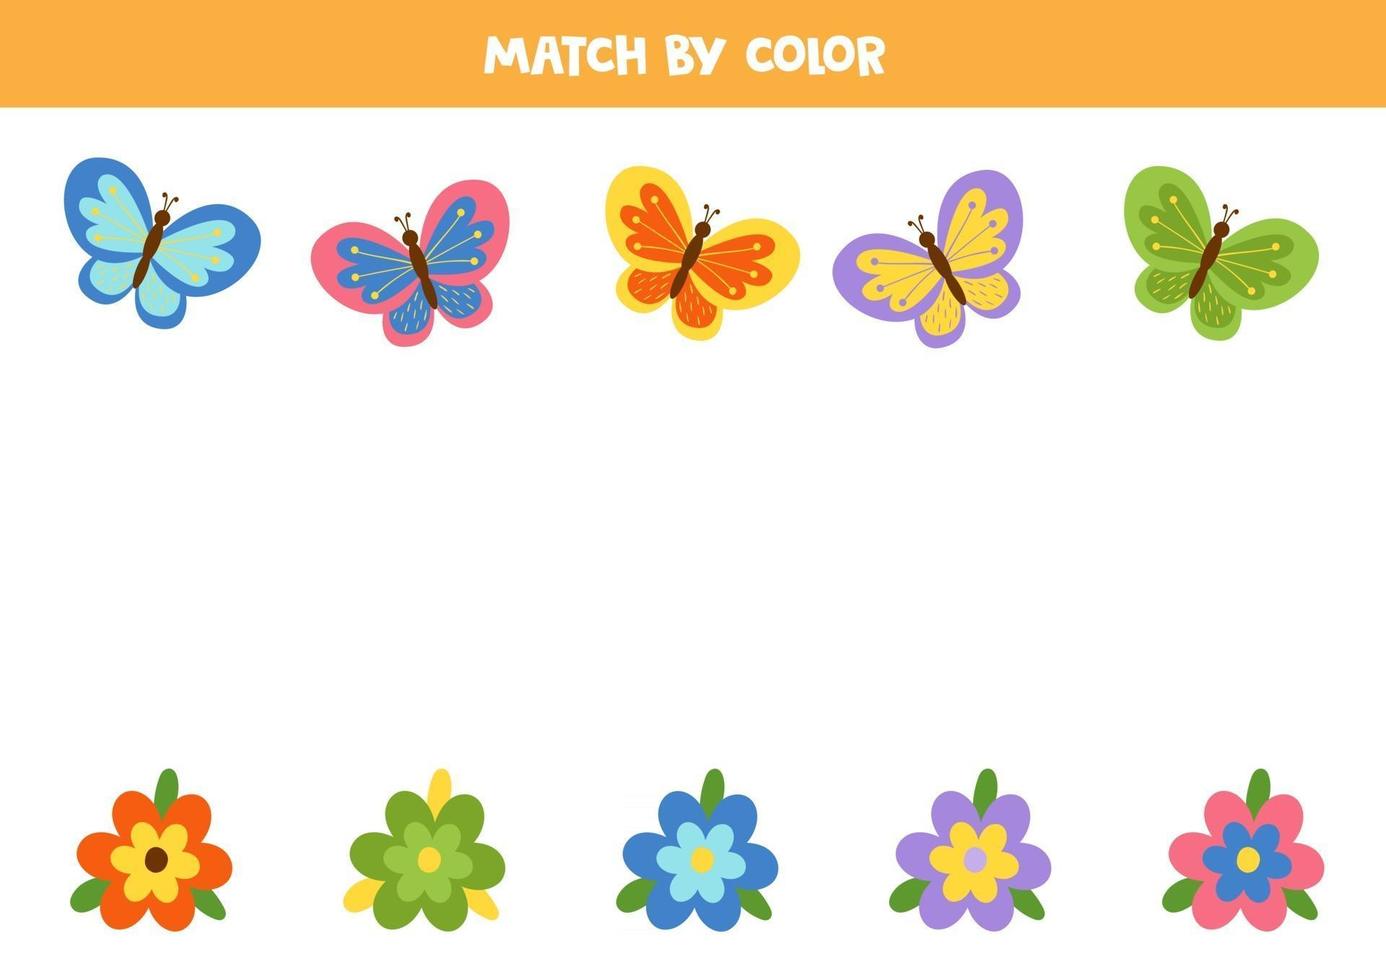 Match colorful butterflies and flowers by color. vector